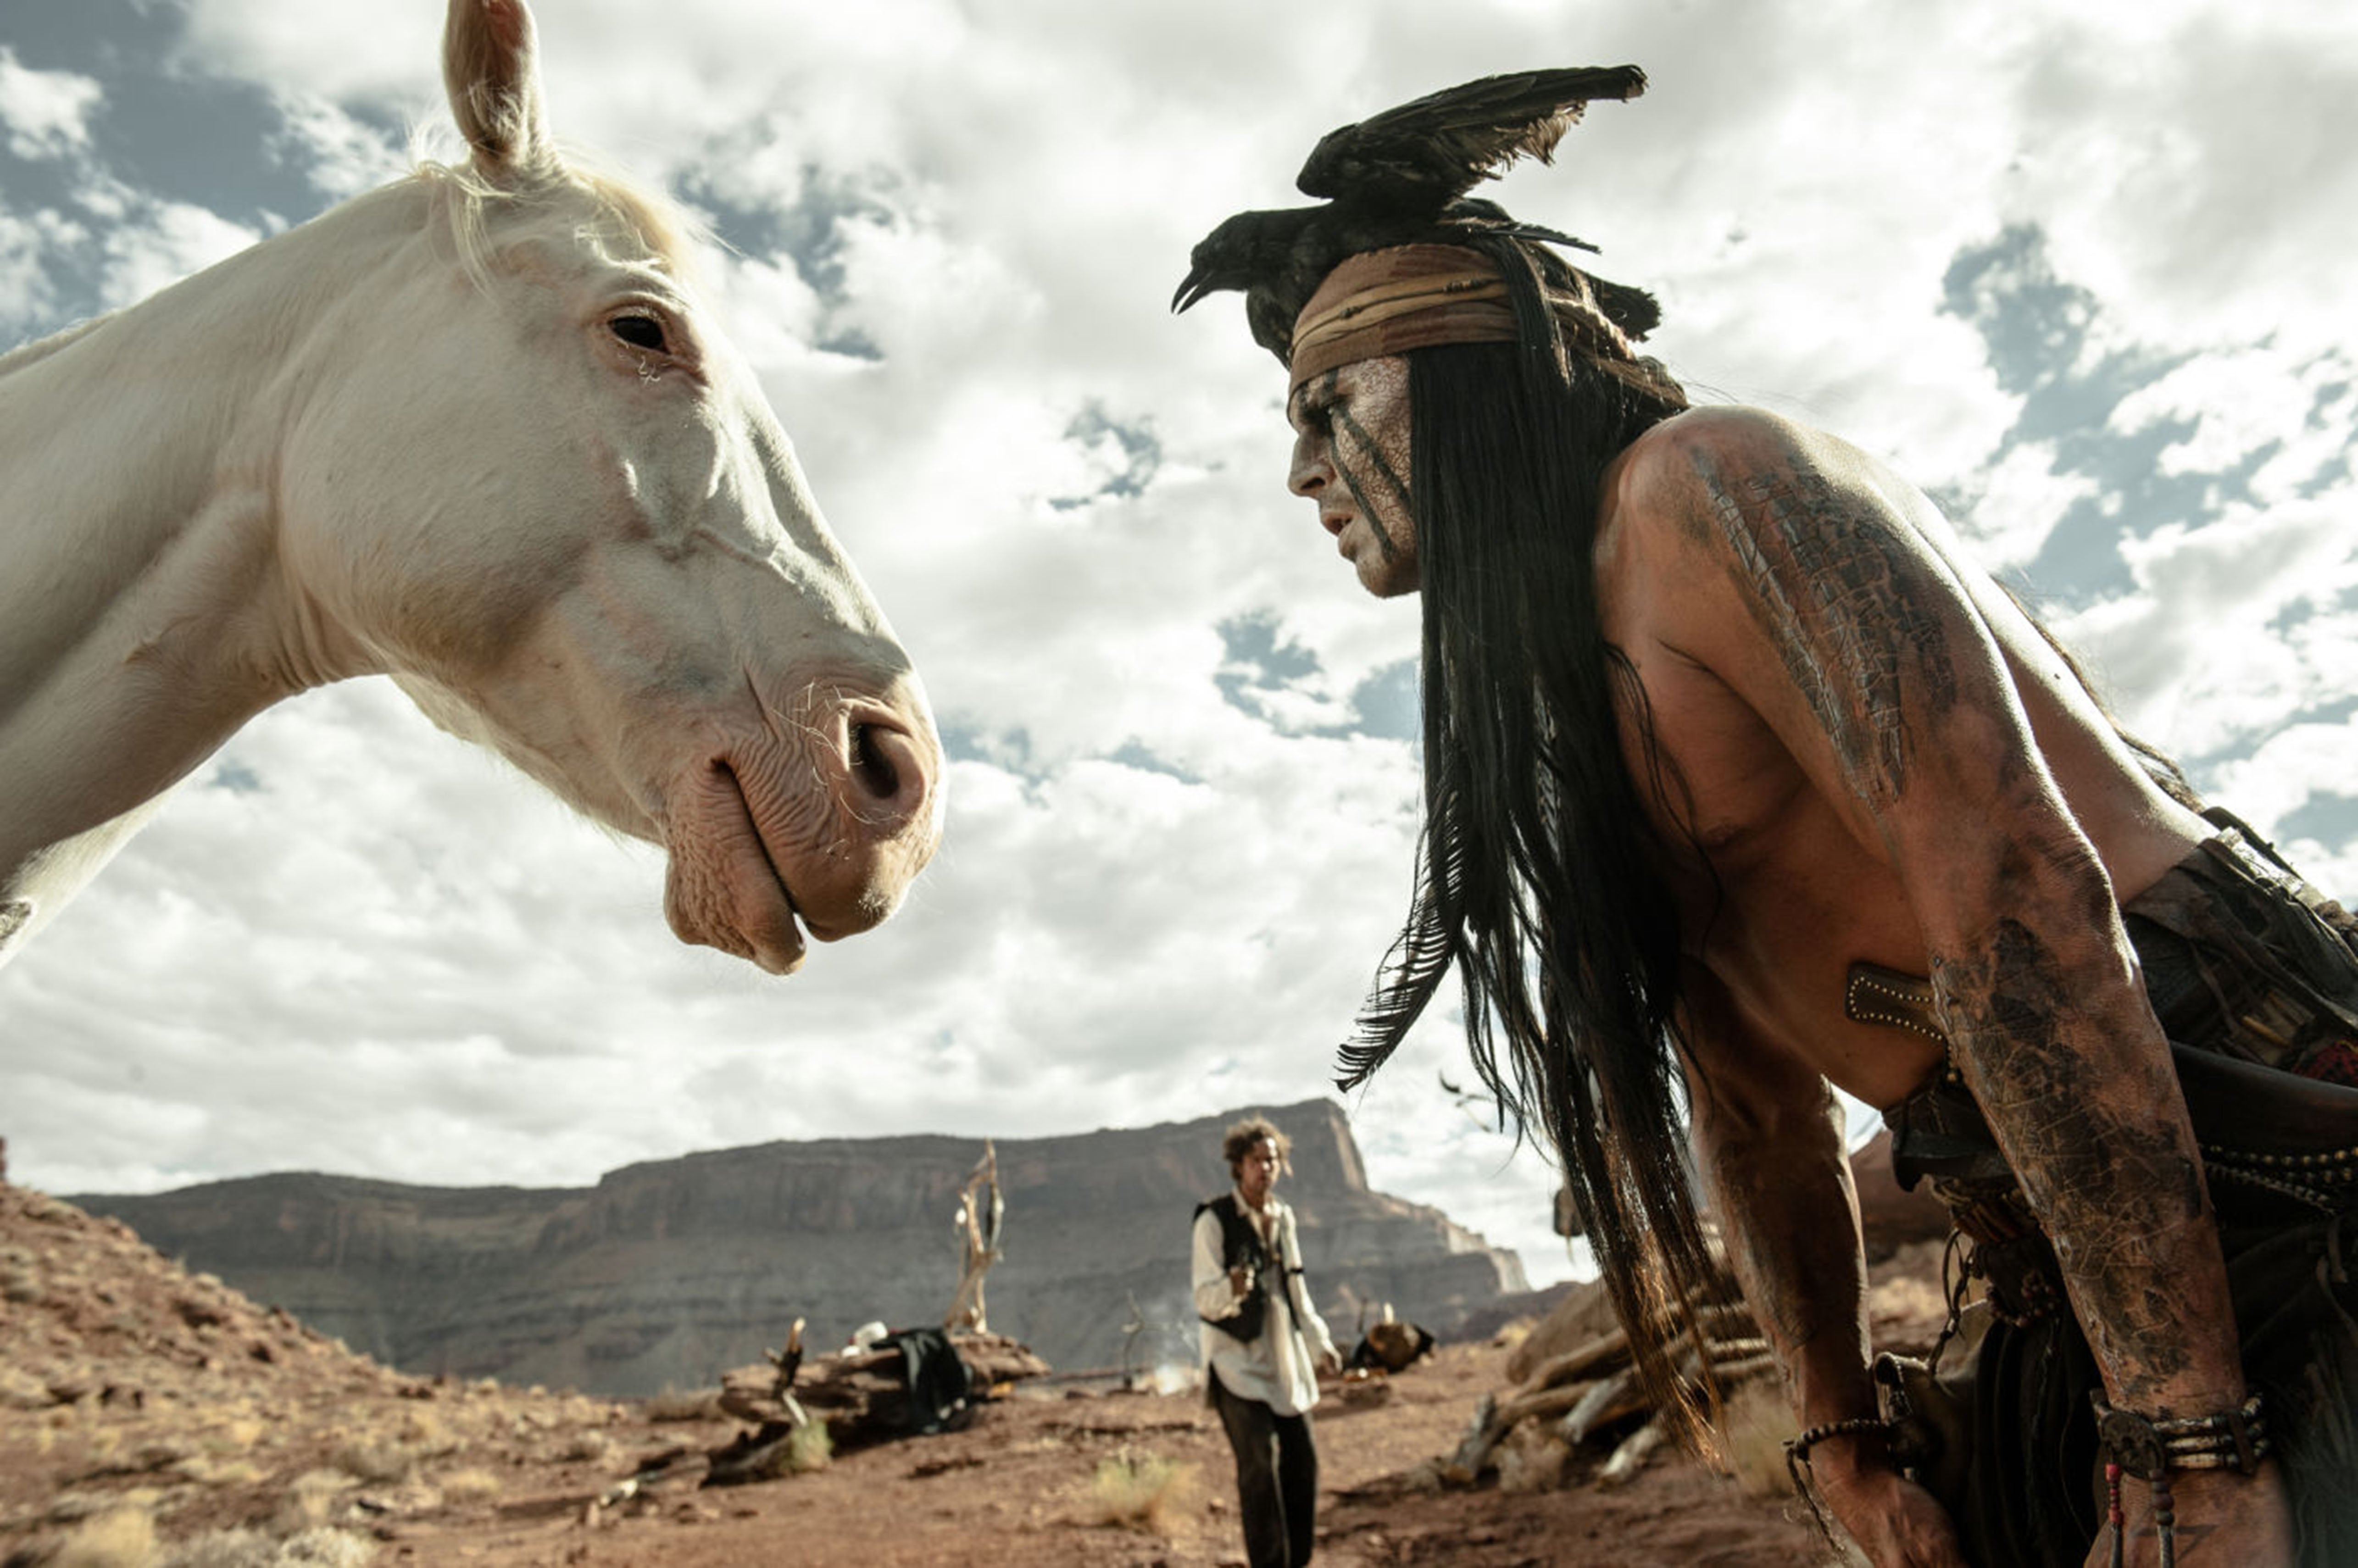 Johnny Depp with his horse in ‘The Lone Ranger’